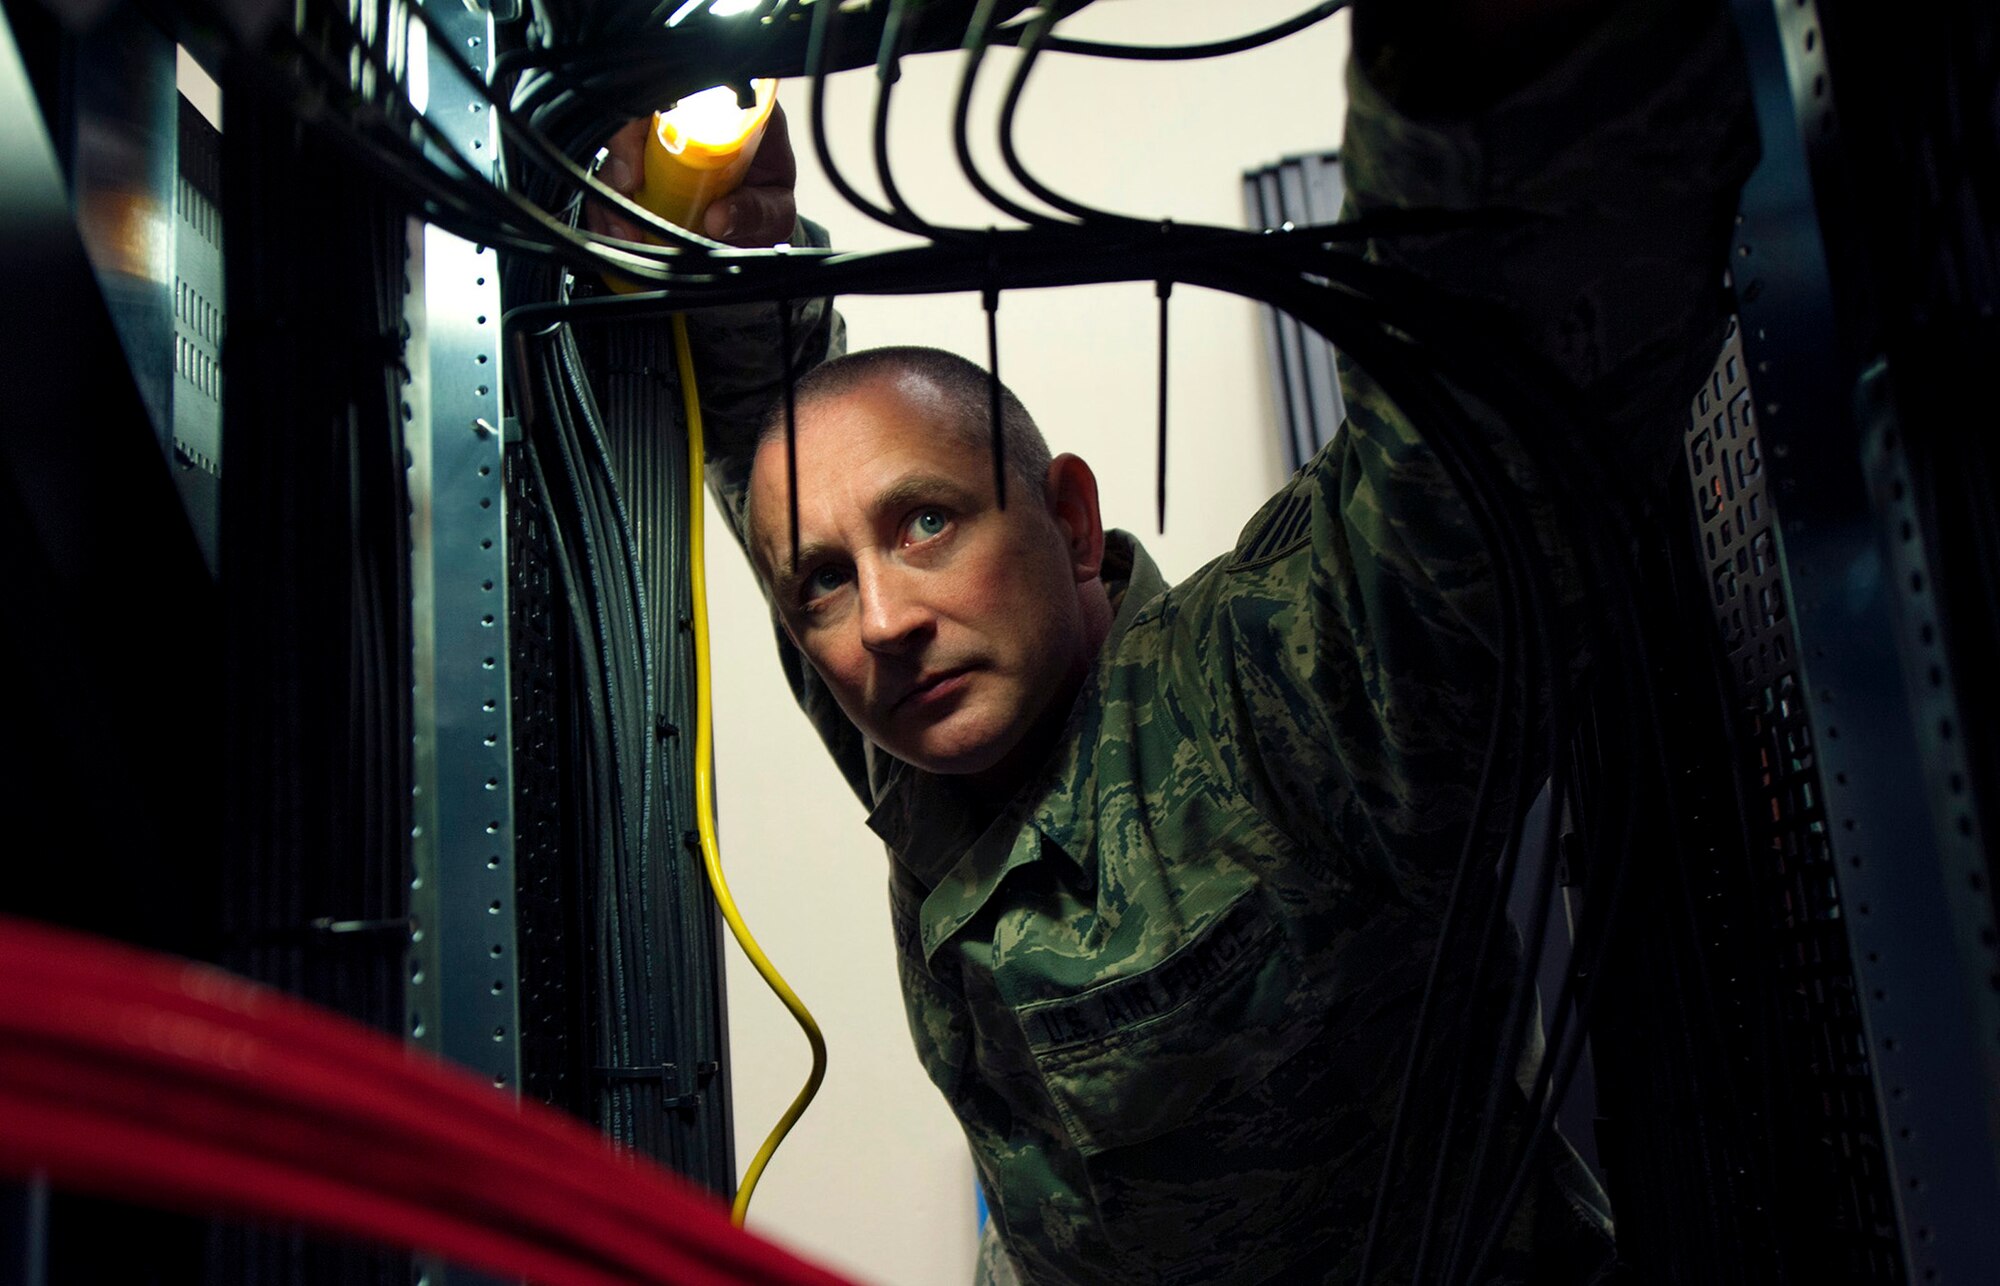 Tech. Sgt. Jeremy Nagy, 270th Engineering Installation Squadron, Range Simulation Center Installer, inspects a cabinet of recently installed cables March 2, 2016, Vandenberg Air Force Base, Calif. Nagy is part of an Air National Guard EI team working on a relocation of the Launch and Test Range System for the Western Range. (U.S. Air Force photo by Michael Peterson/released)